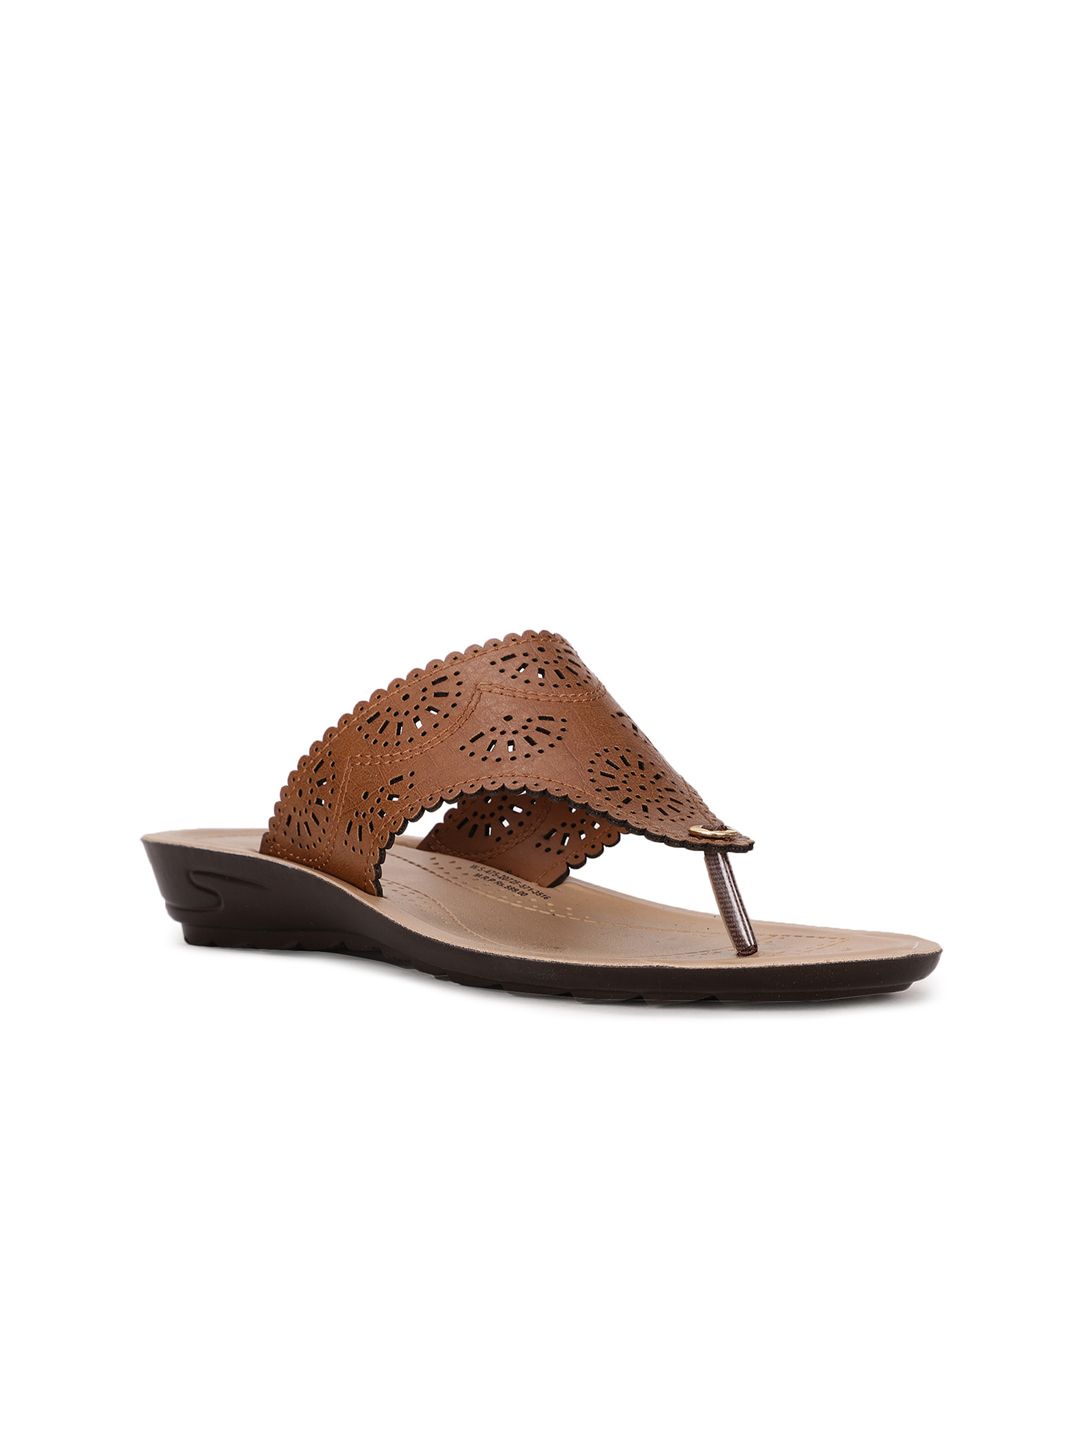 Bata Women Tan Brown Open Toe Flats with Laser Cuts Price in India